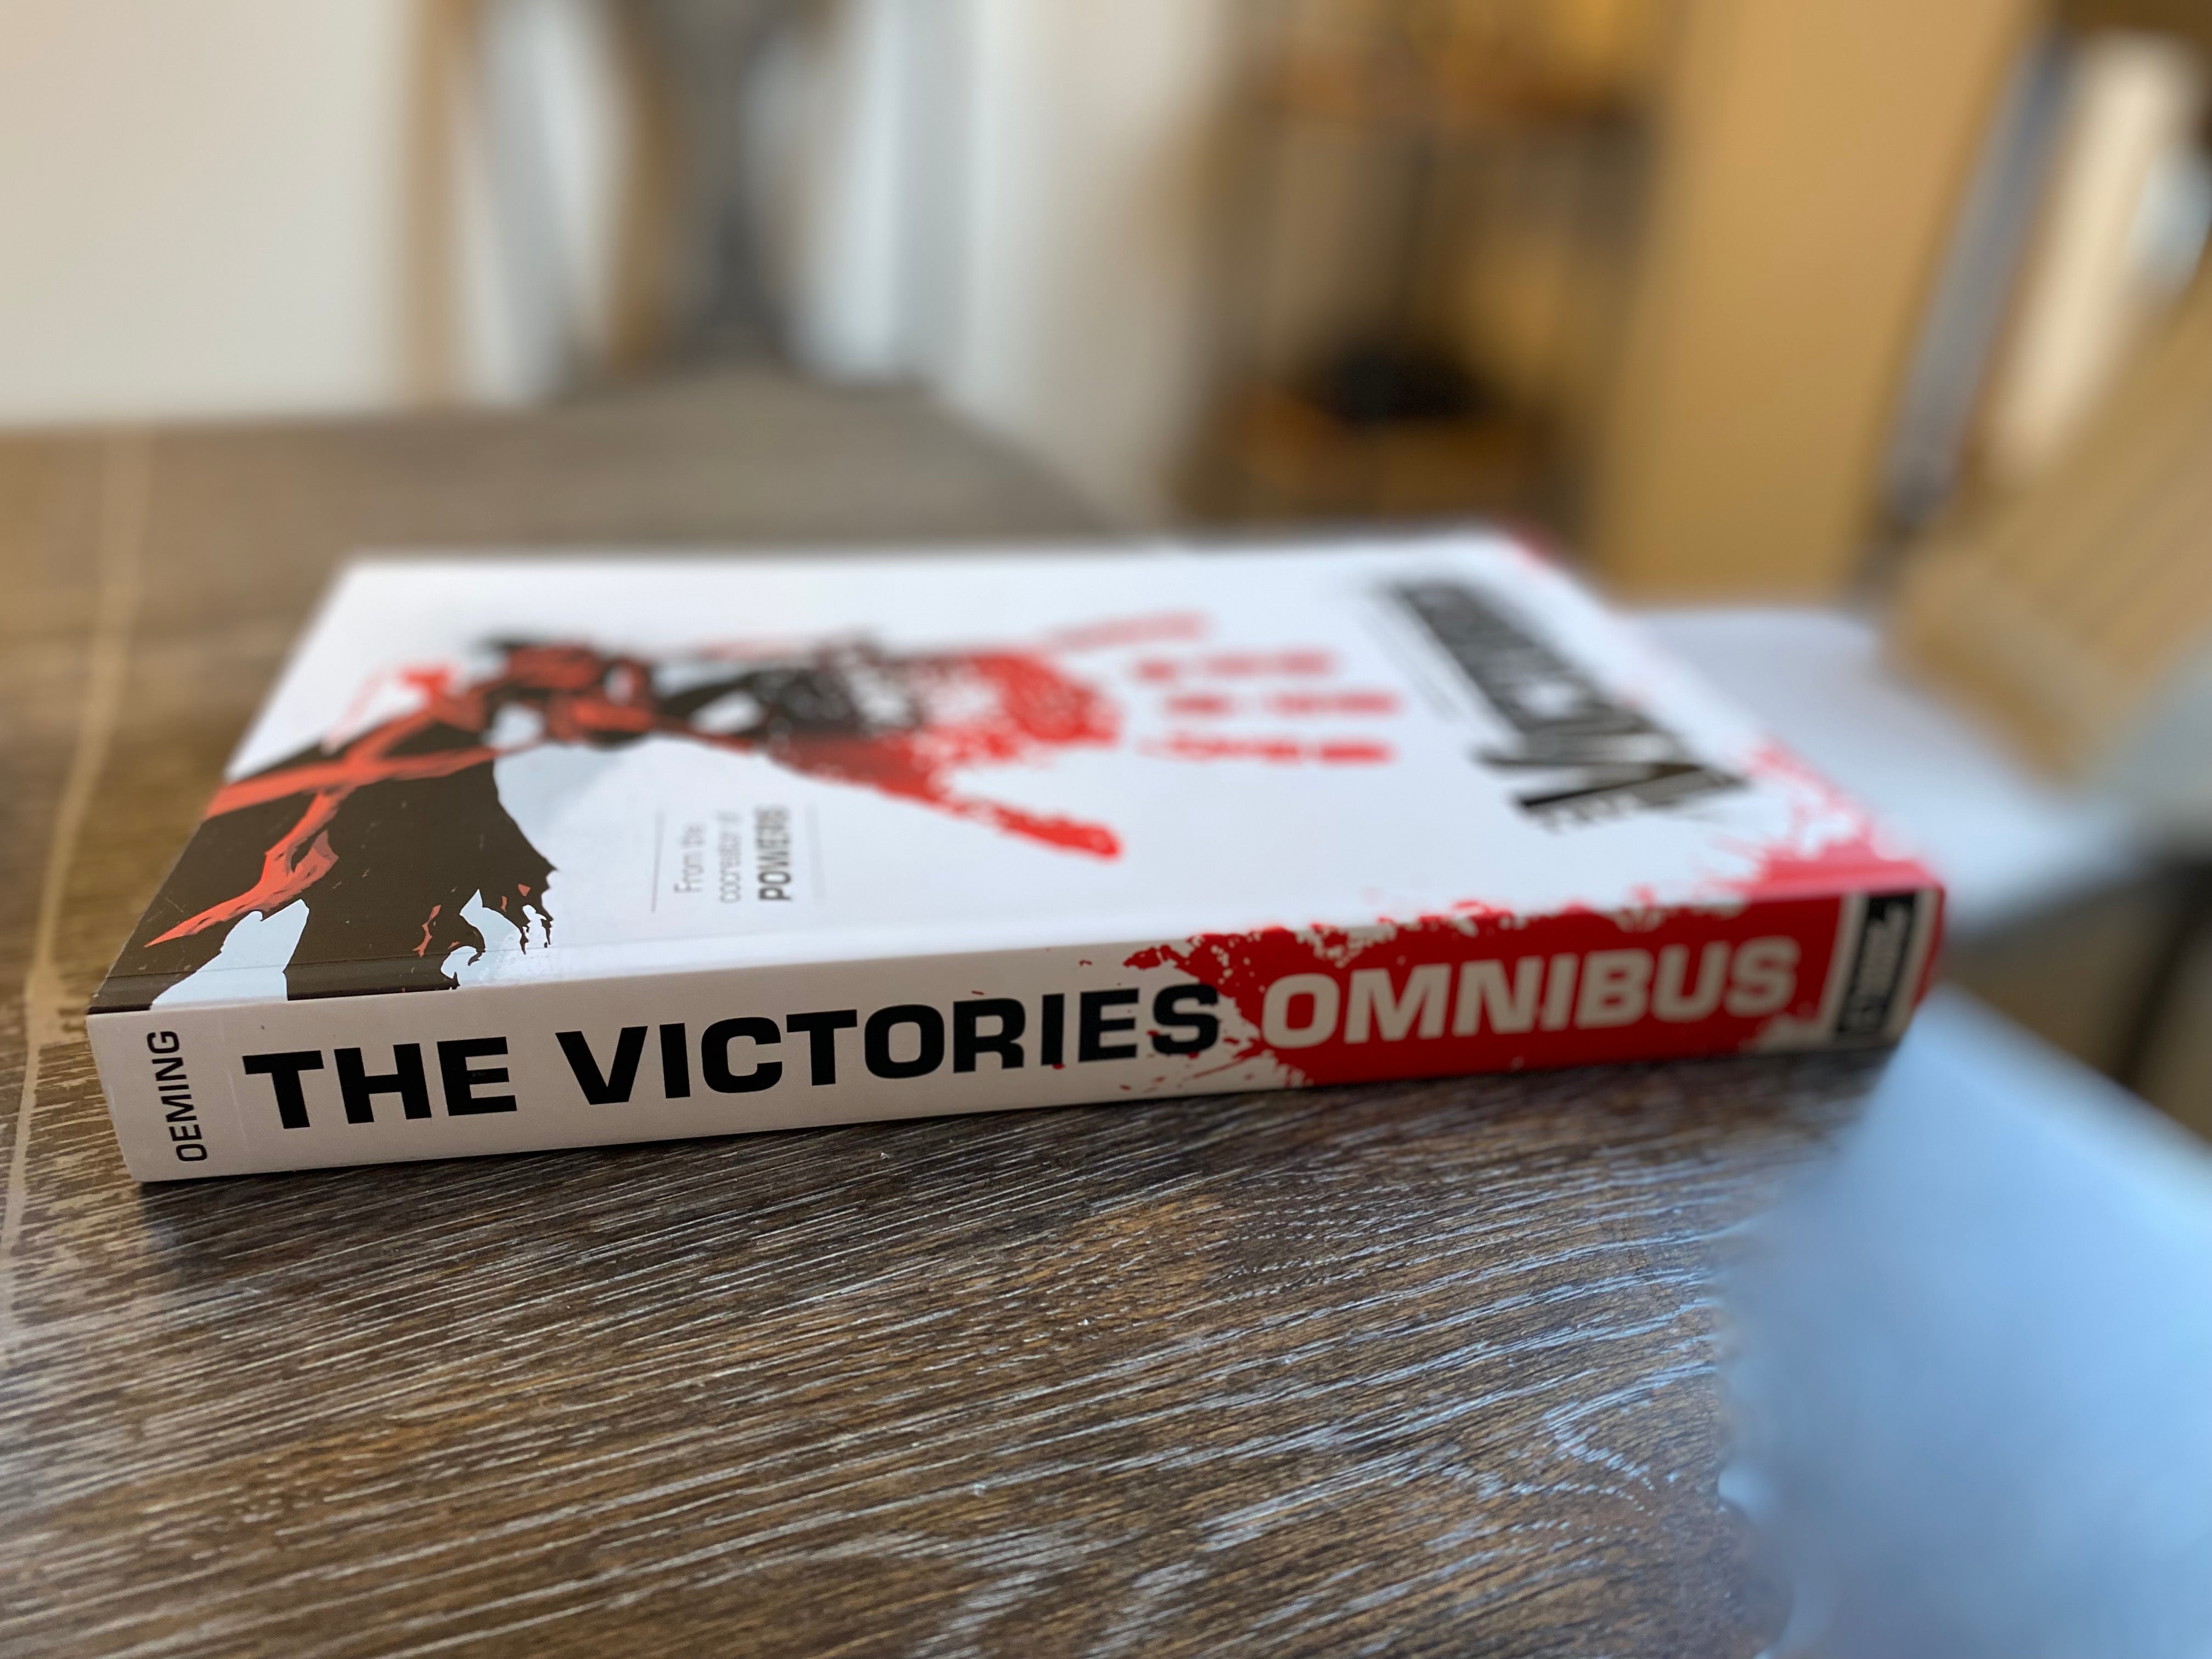 The Victories 570 page OMNIBUS is coming!